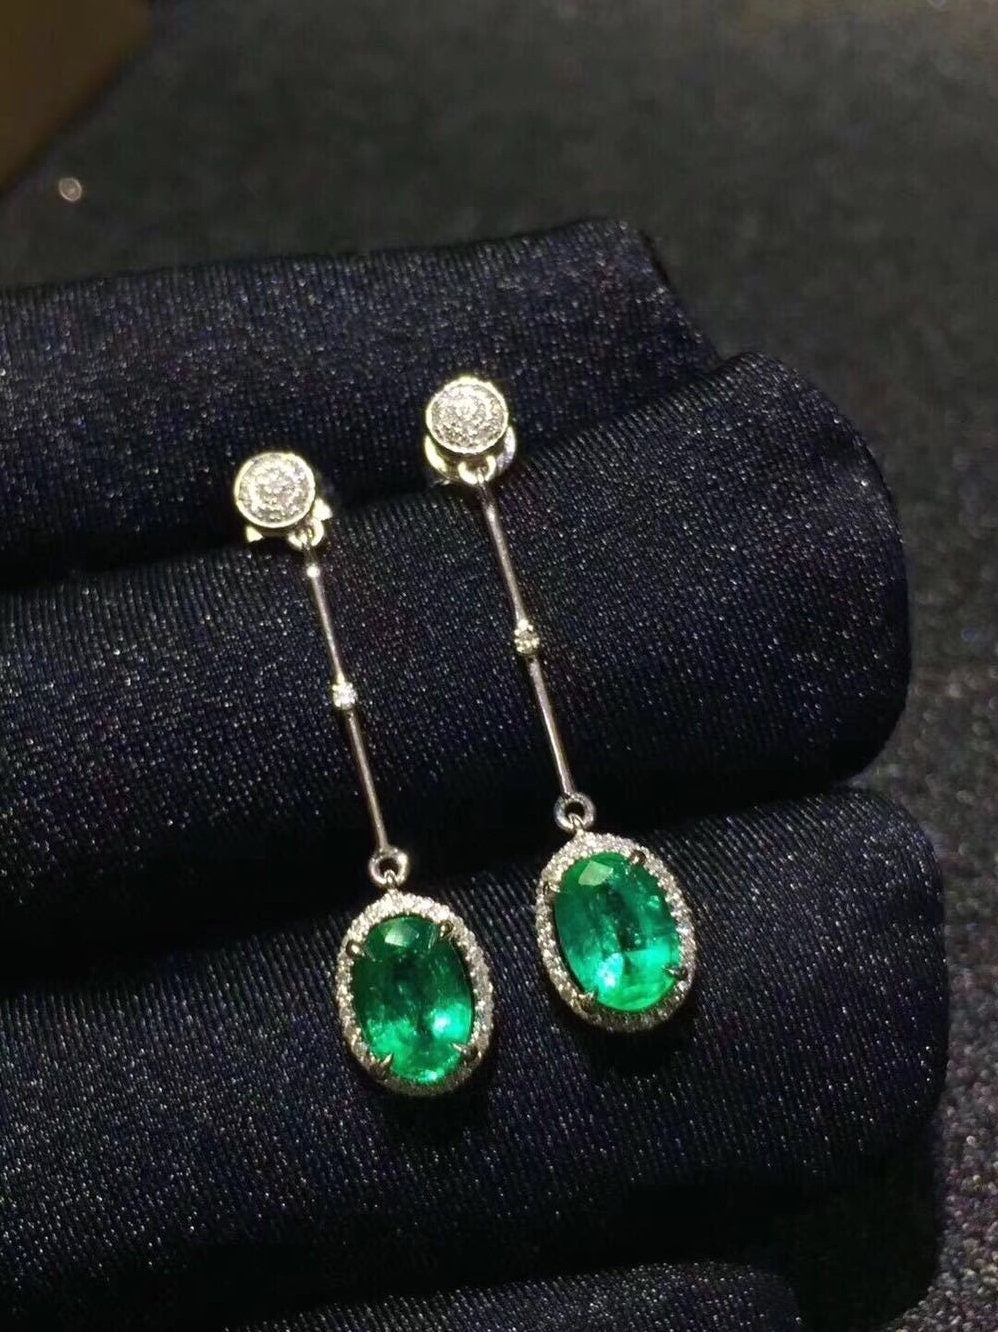 Natural Green Columbia Emerald Earrings, May Birthstone, Gold Plated Sterling Silver Earrings for Women, Engagement Wedding Earrings